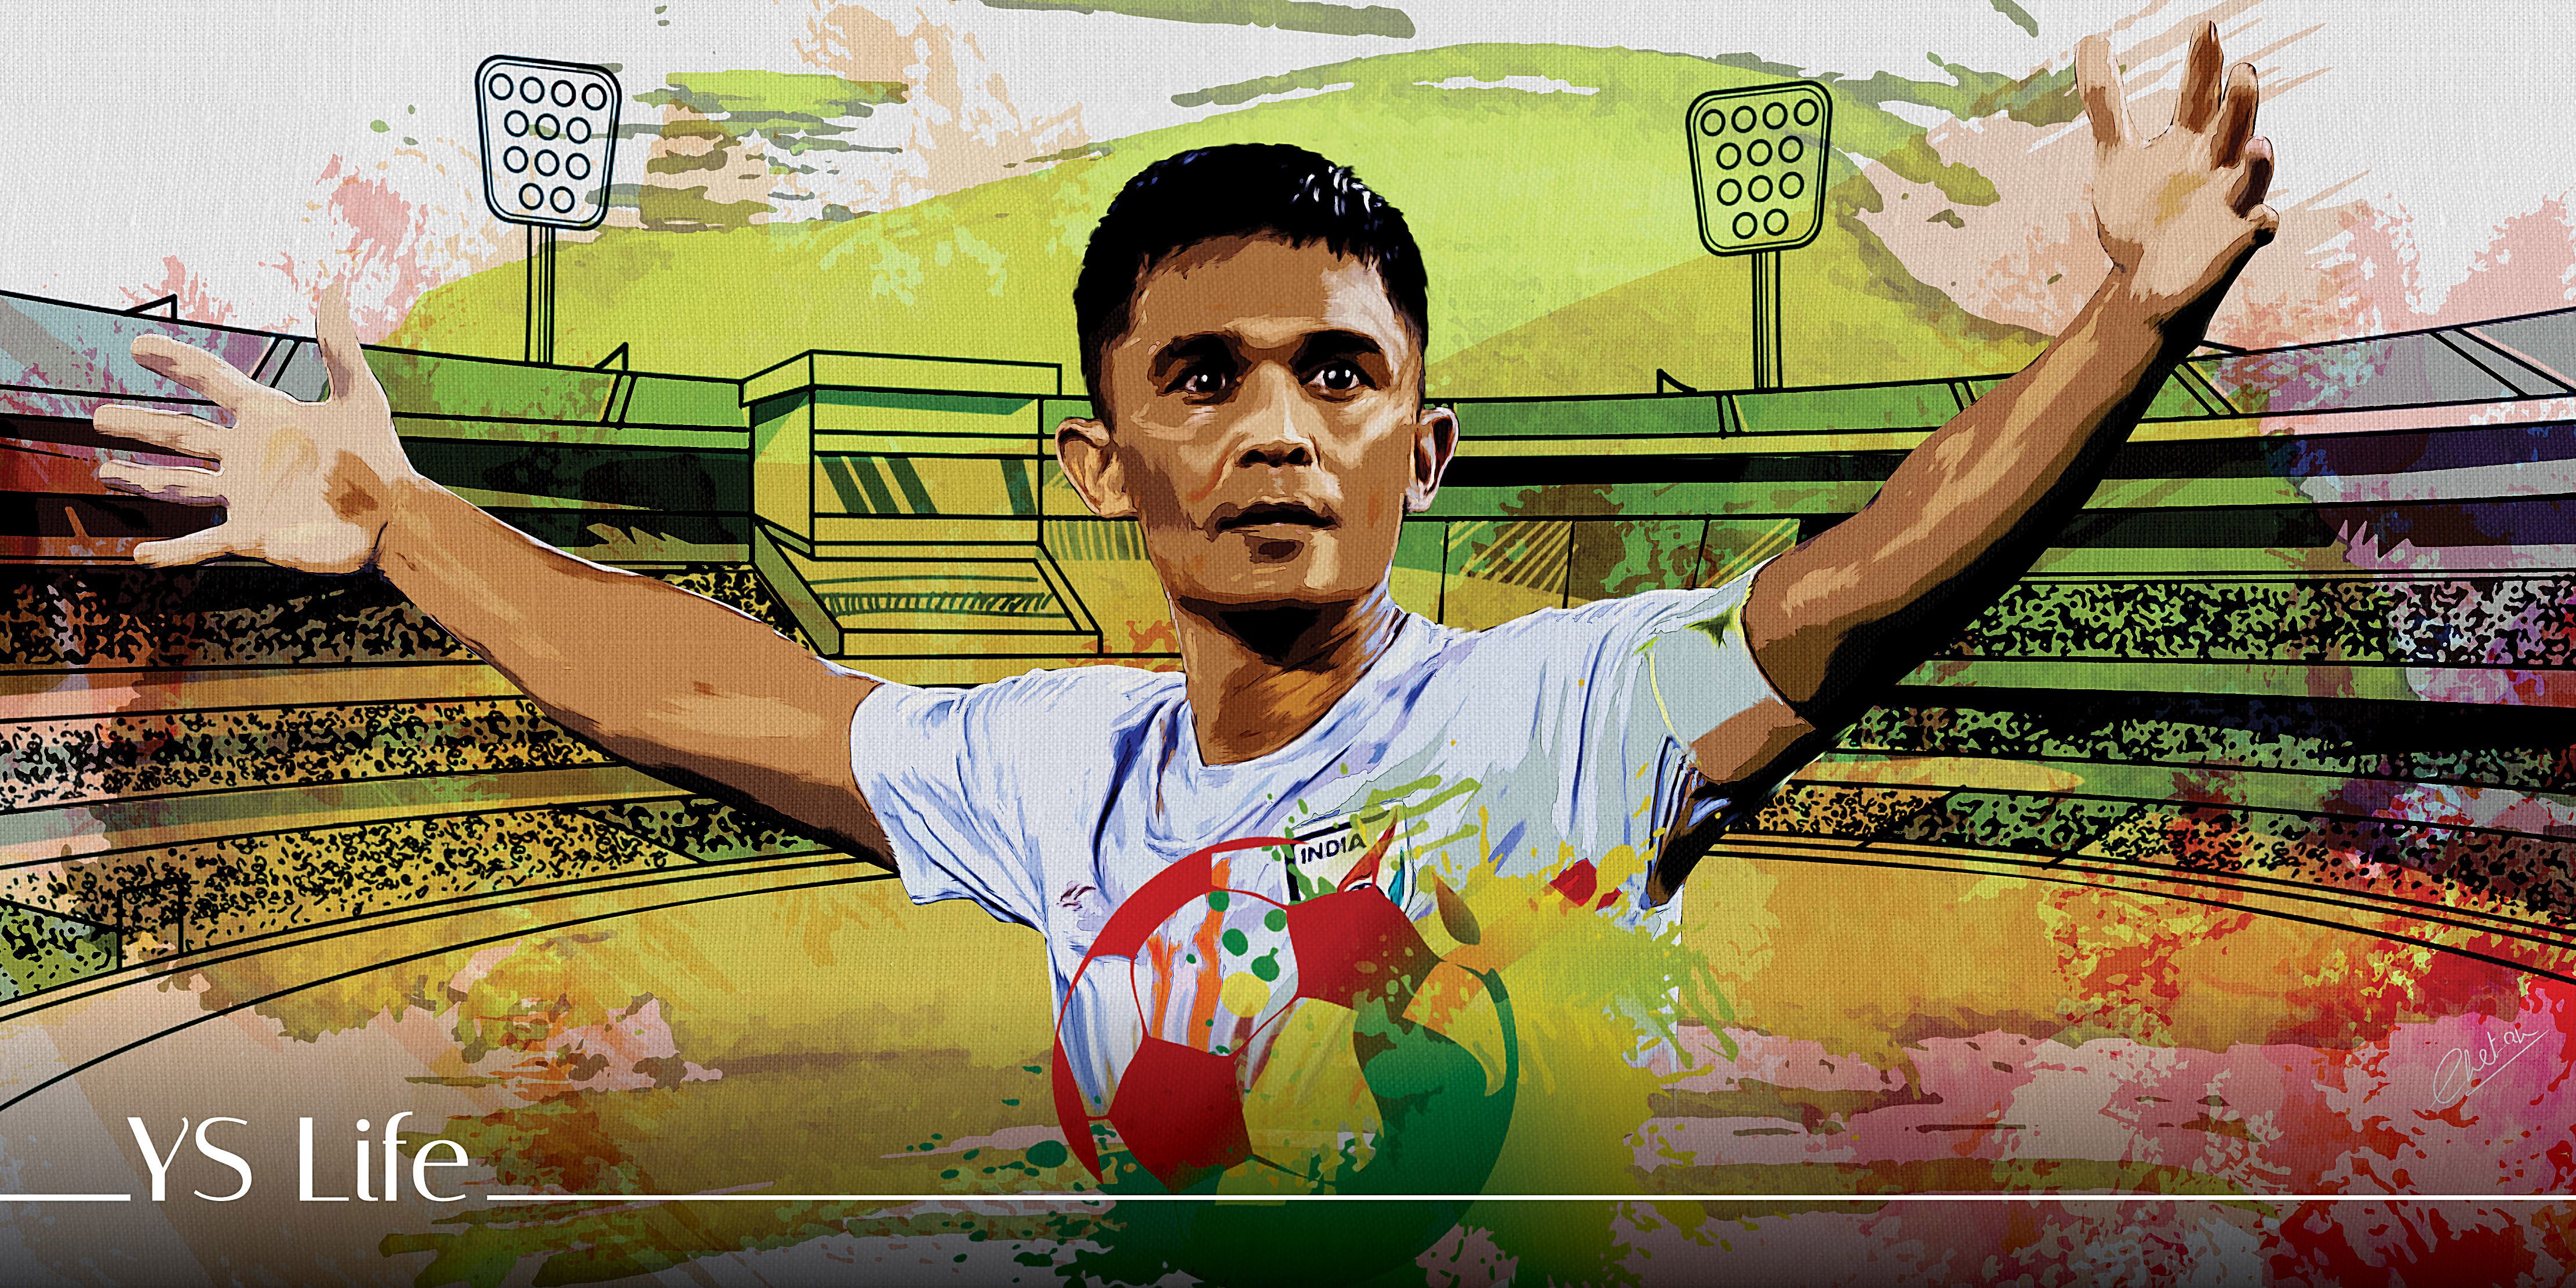 ‘To leave the world better than I found it’: Sunil Chhetri on football, life and more